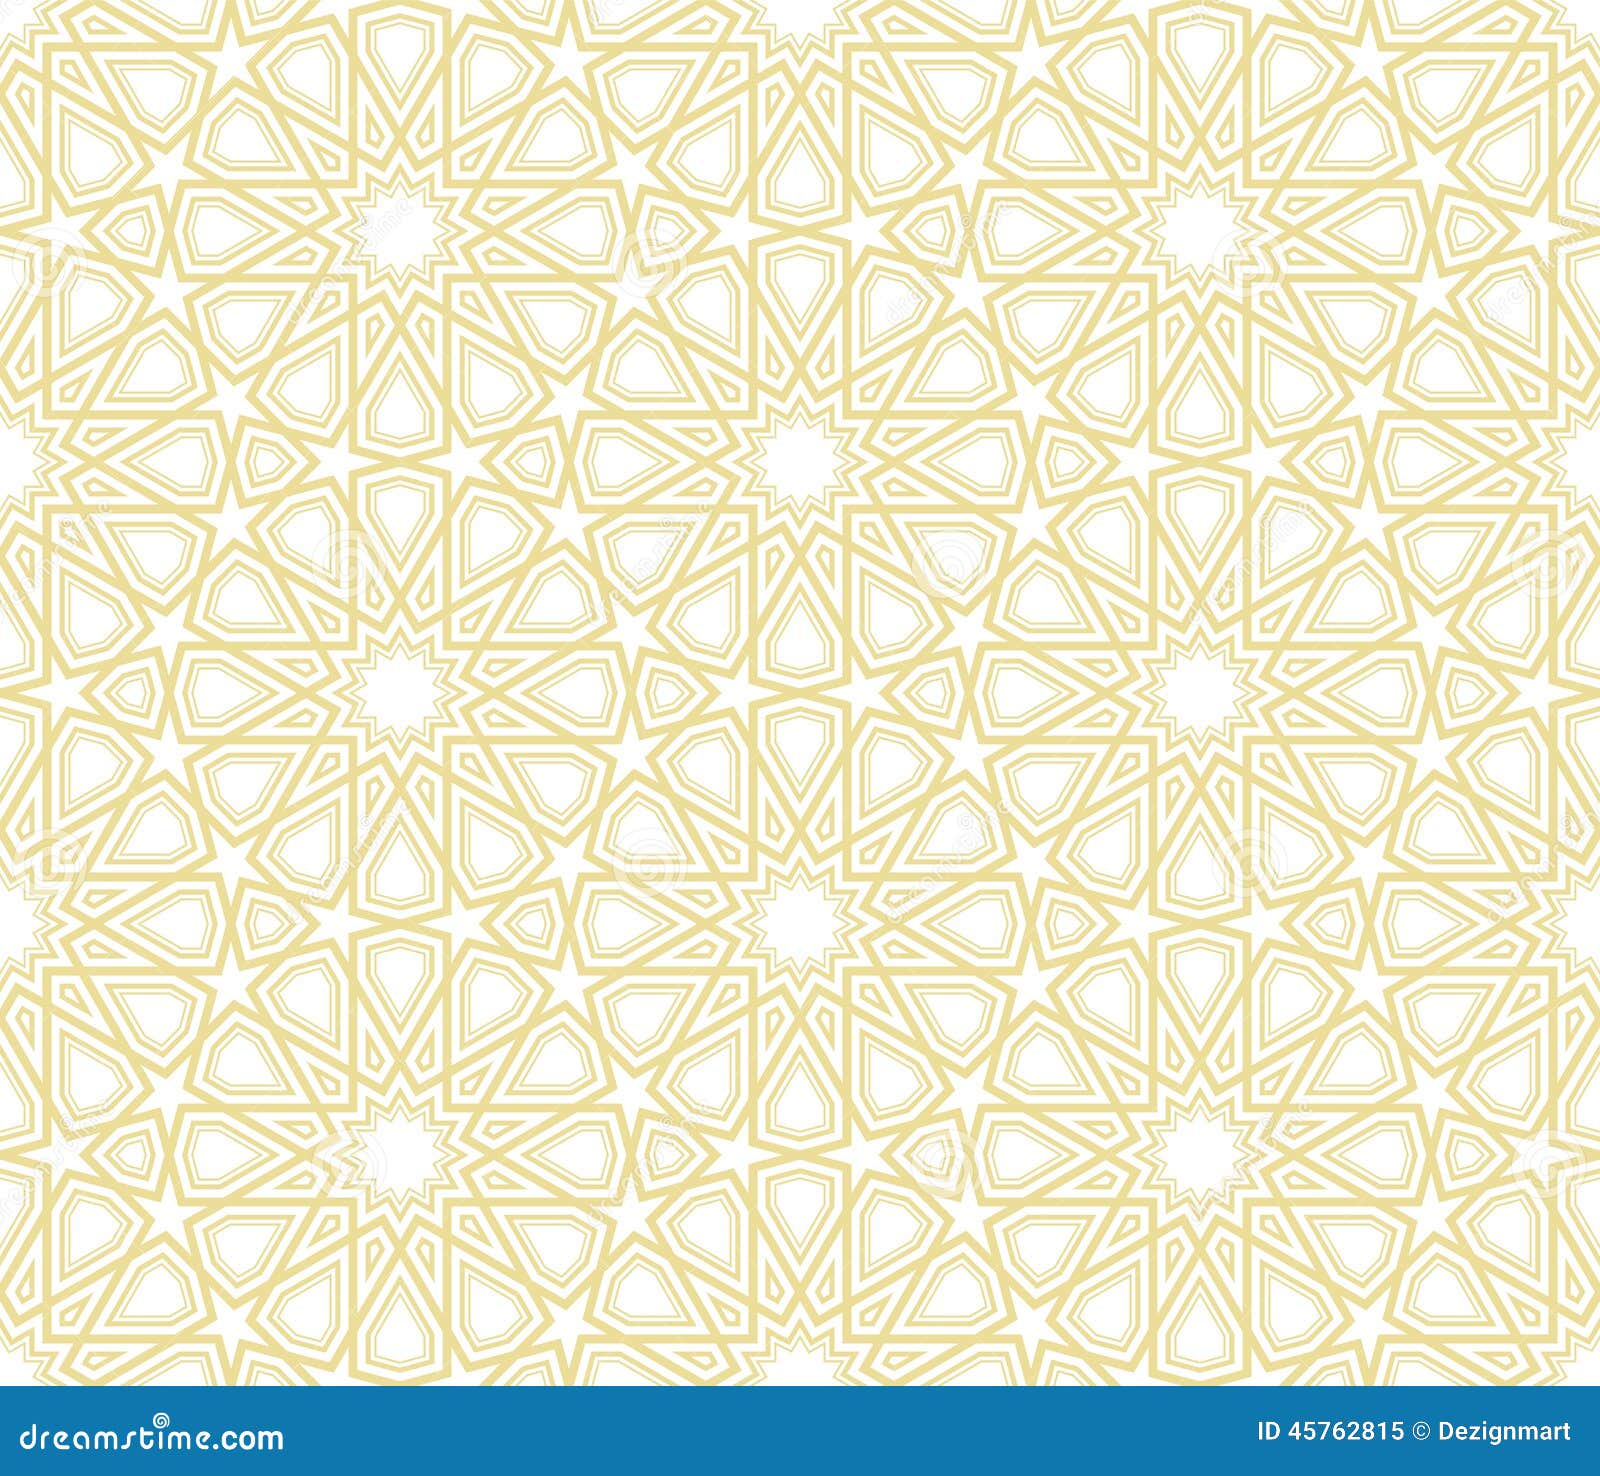 Islamic Star Pattern Background Stock Vector - Image: 45762815